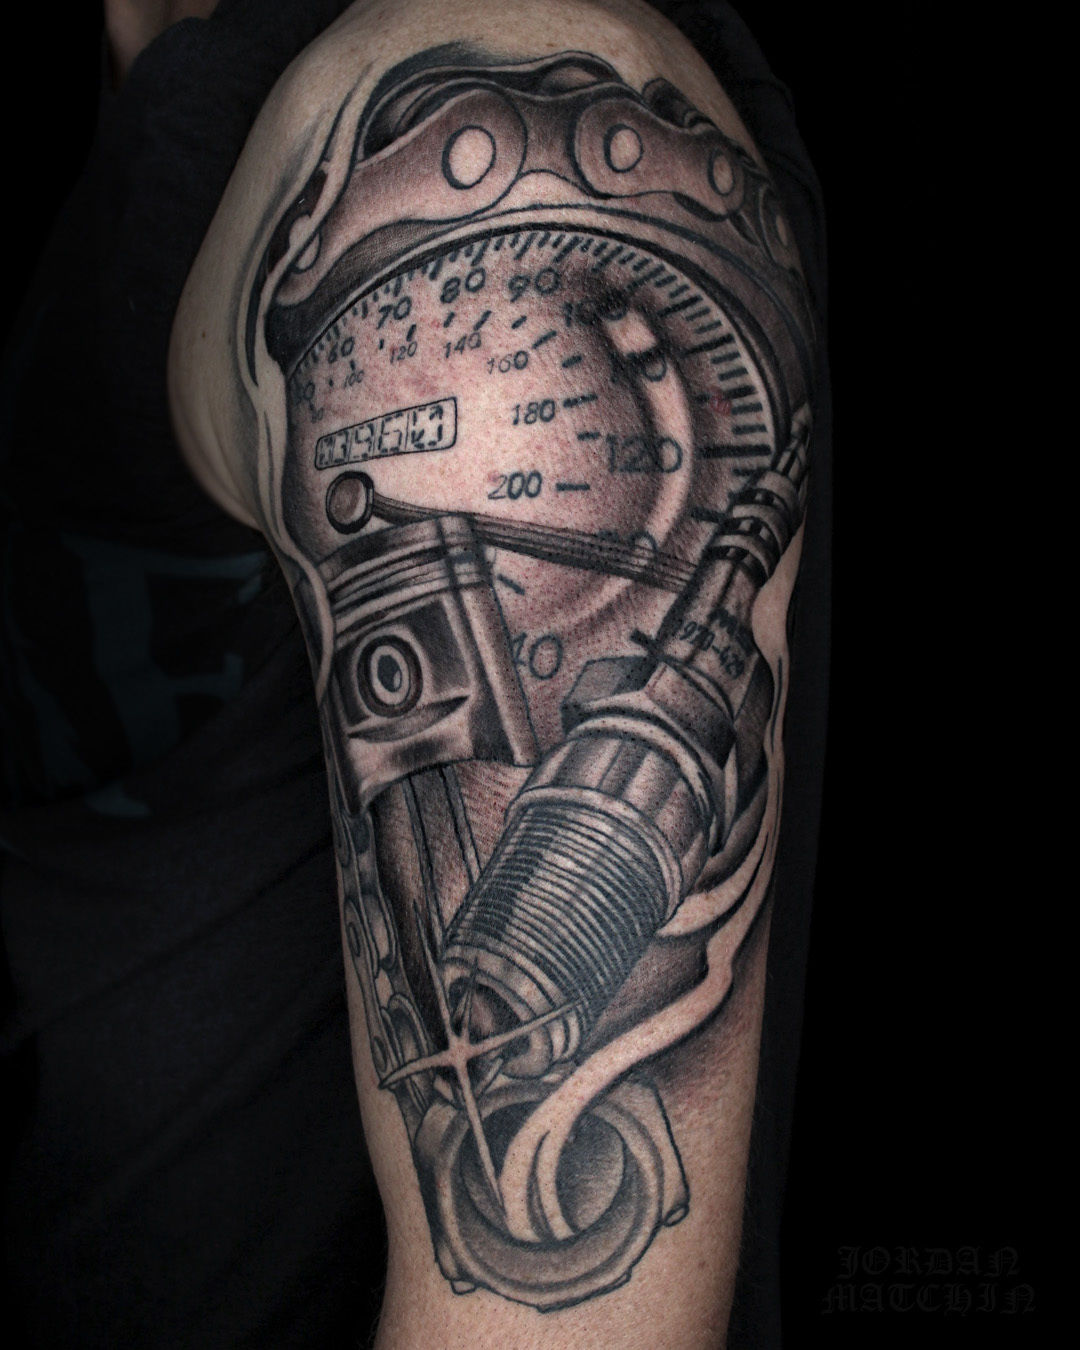 True At Heart Tattoo HB - Turbo, piston, spark plug and wrench Tattoo done  by our resident artist @tyleredwardashbrook thanks for looking. #tattoo# tattoos#tattooed#tattooing#tattoooer#tattooist#tattooartist#tattooart#tattoowork#tattooworker  ...